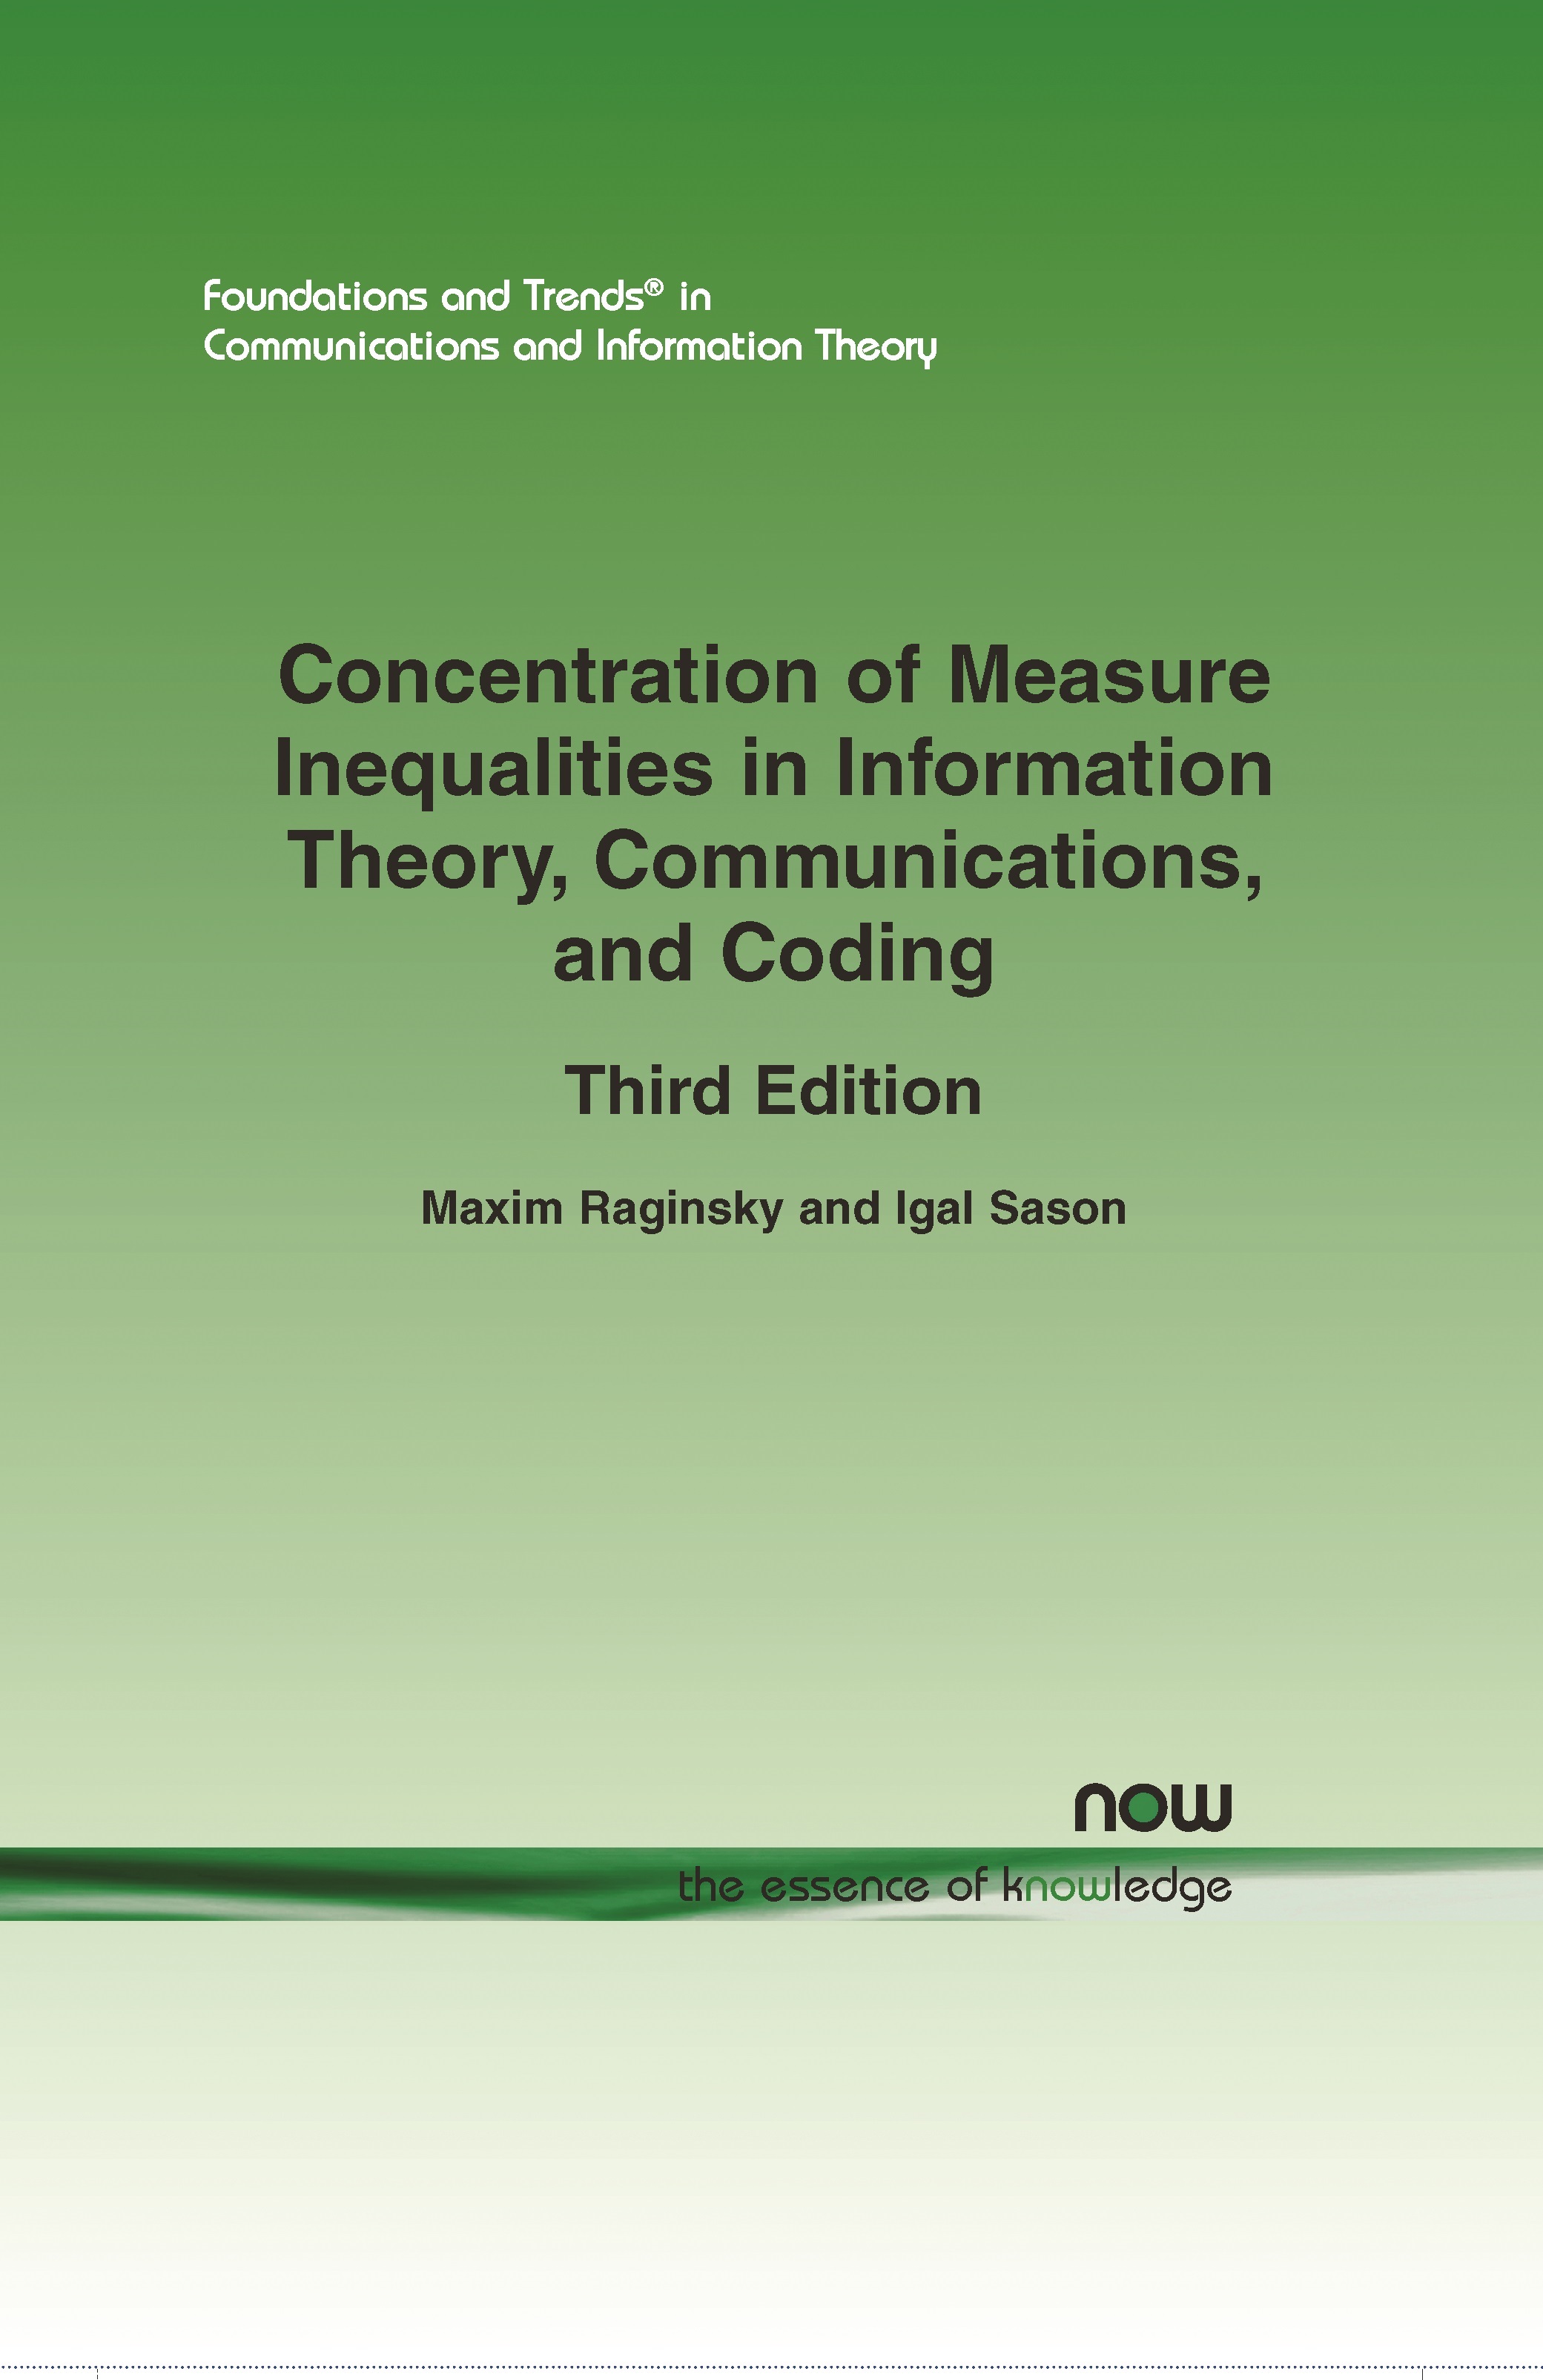 Concentration of Measure Inequalities in Information Theory, Communications, and Coding: Third Edition